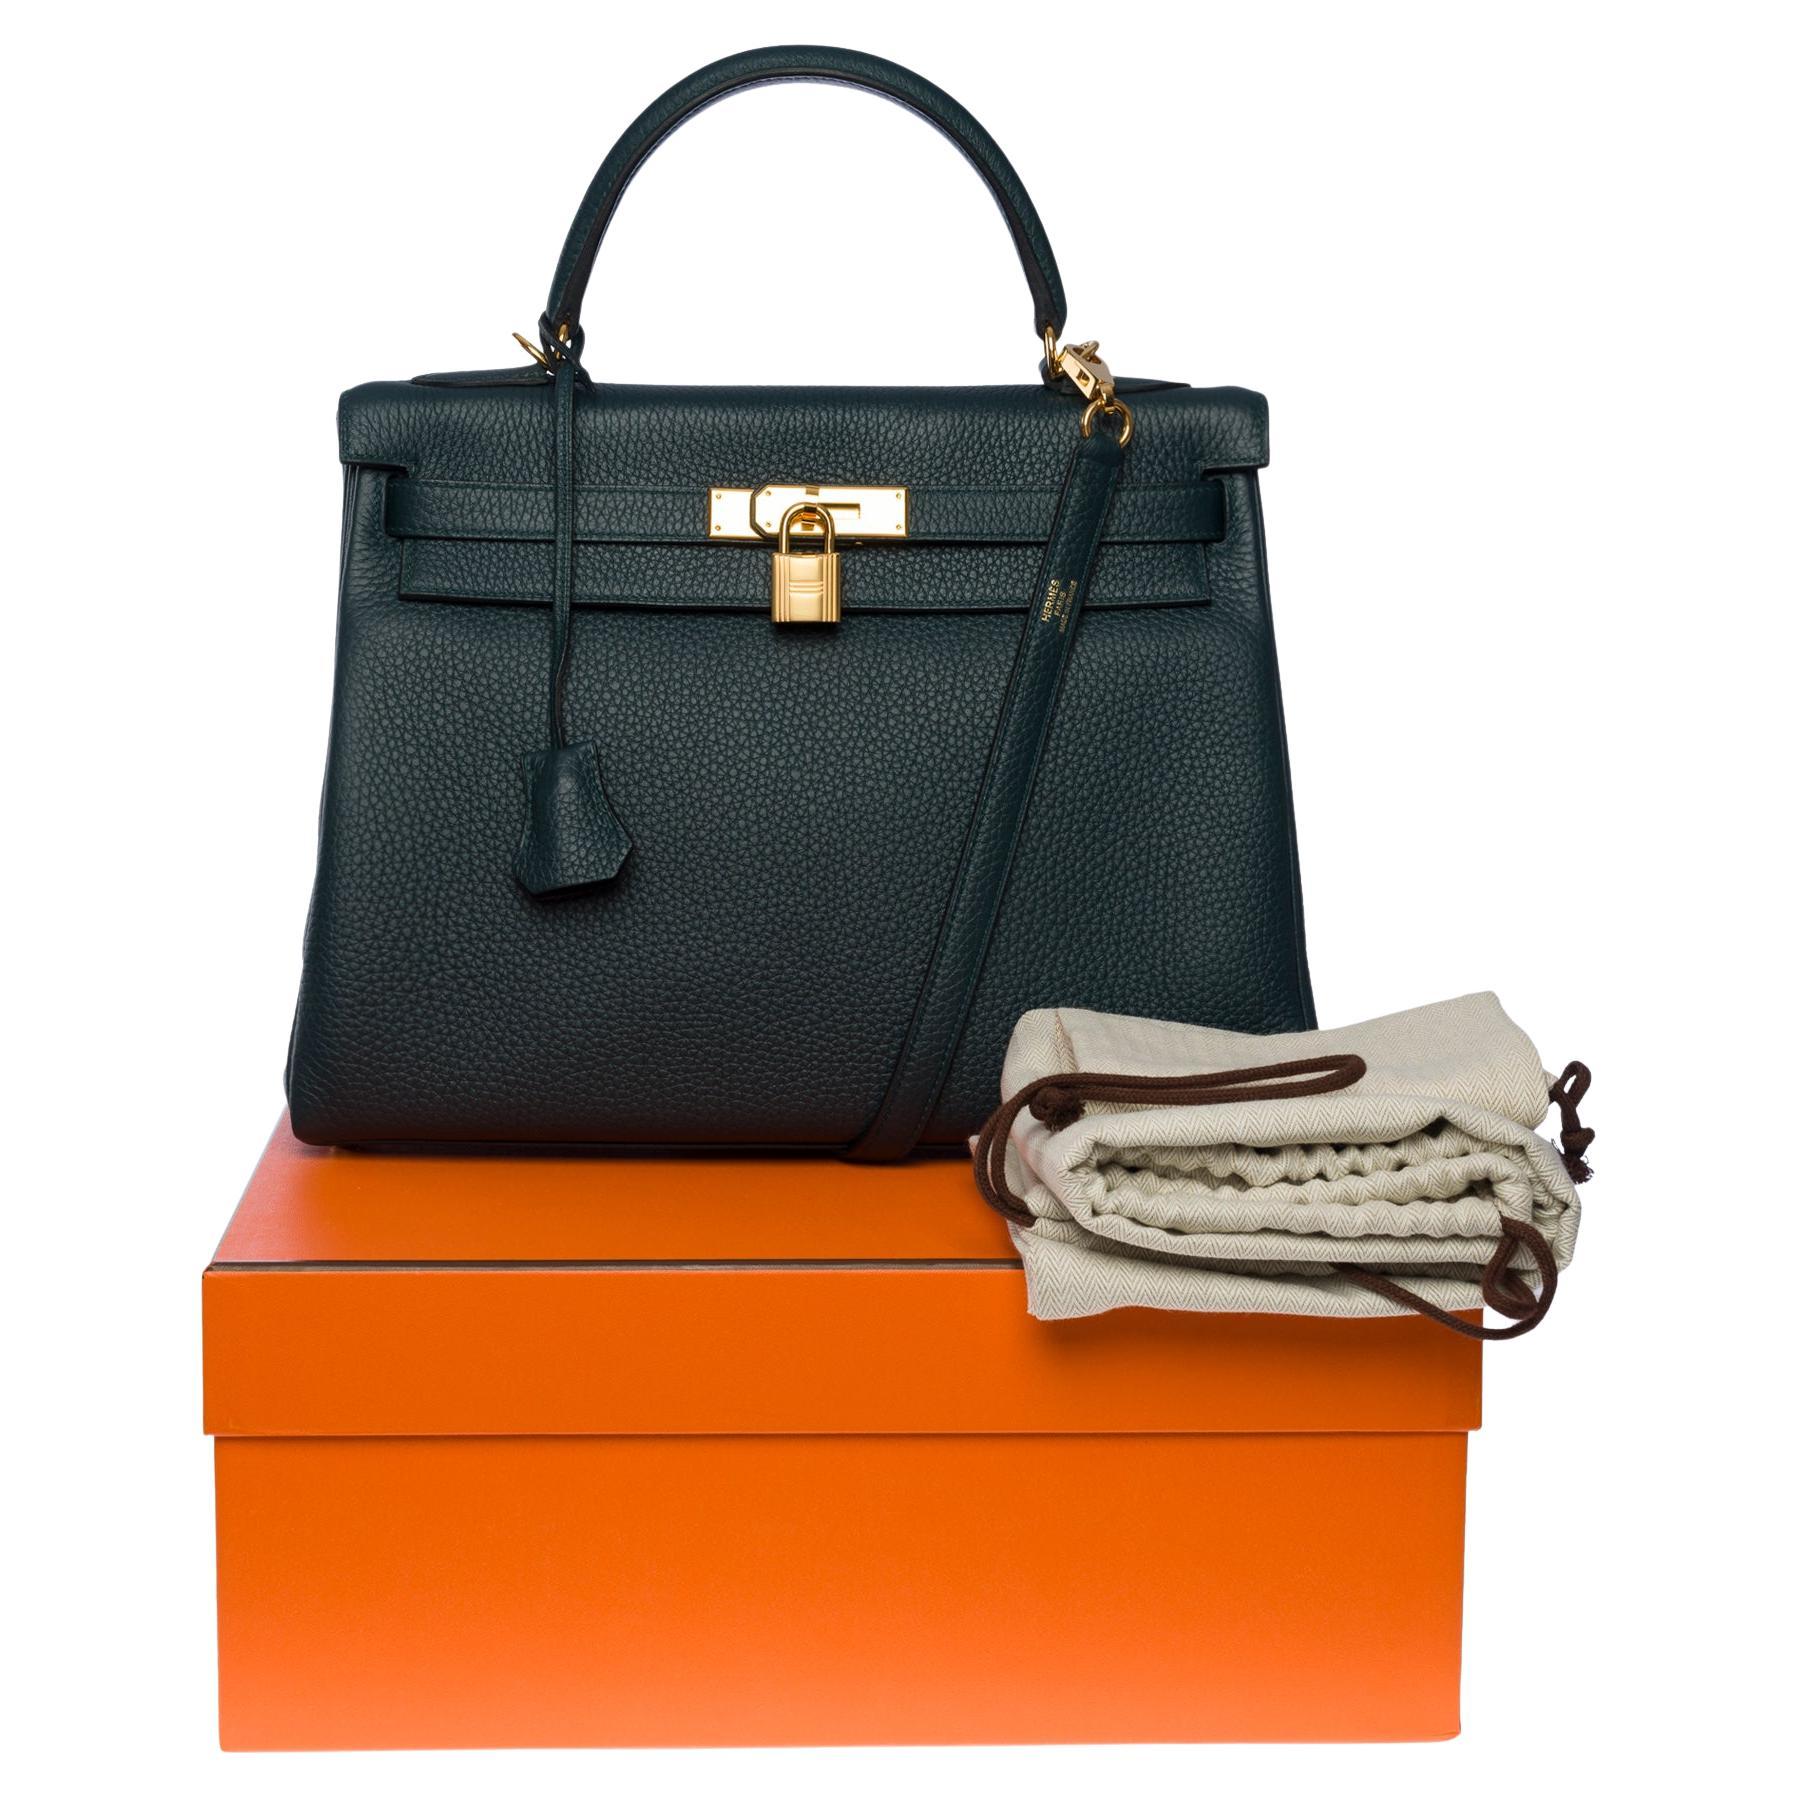 New Hermès Kelly 32 retourne in Green Cypres Taurillon Clemence leather, GHW